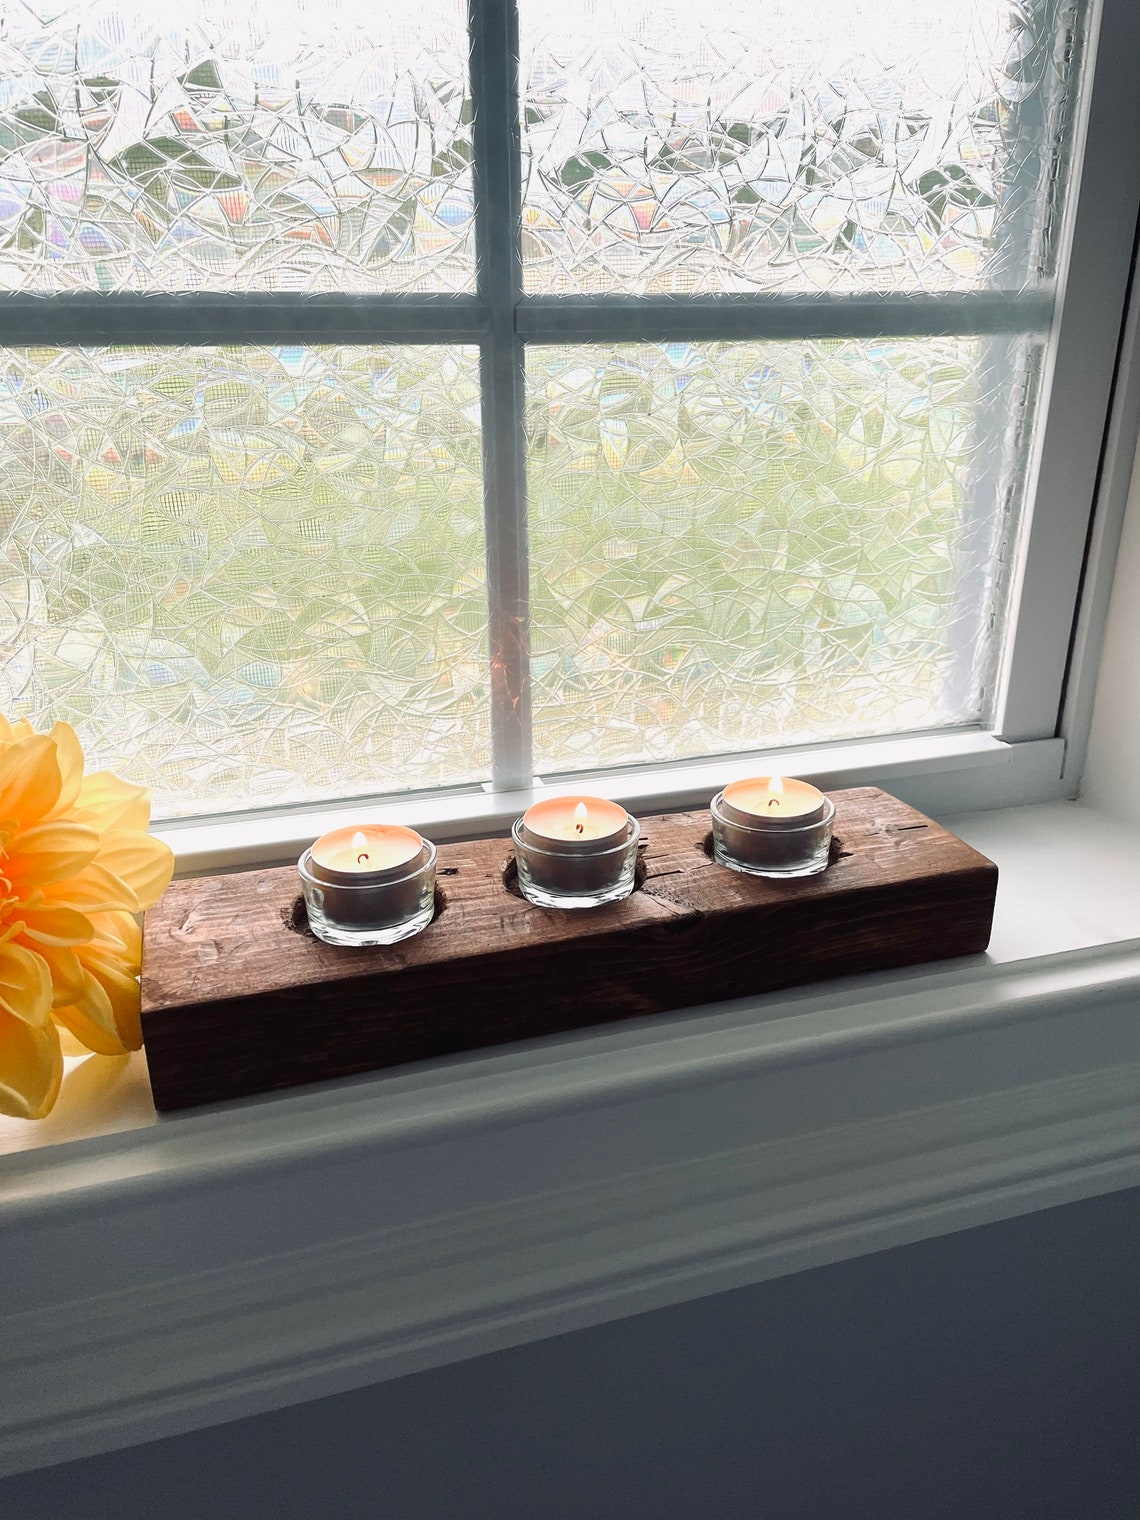 wood candle holder by window